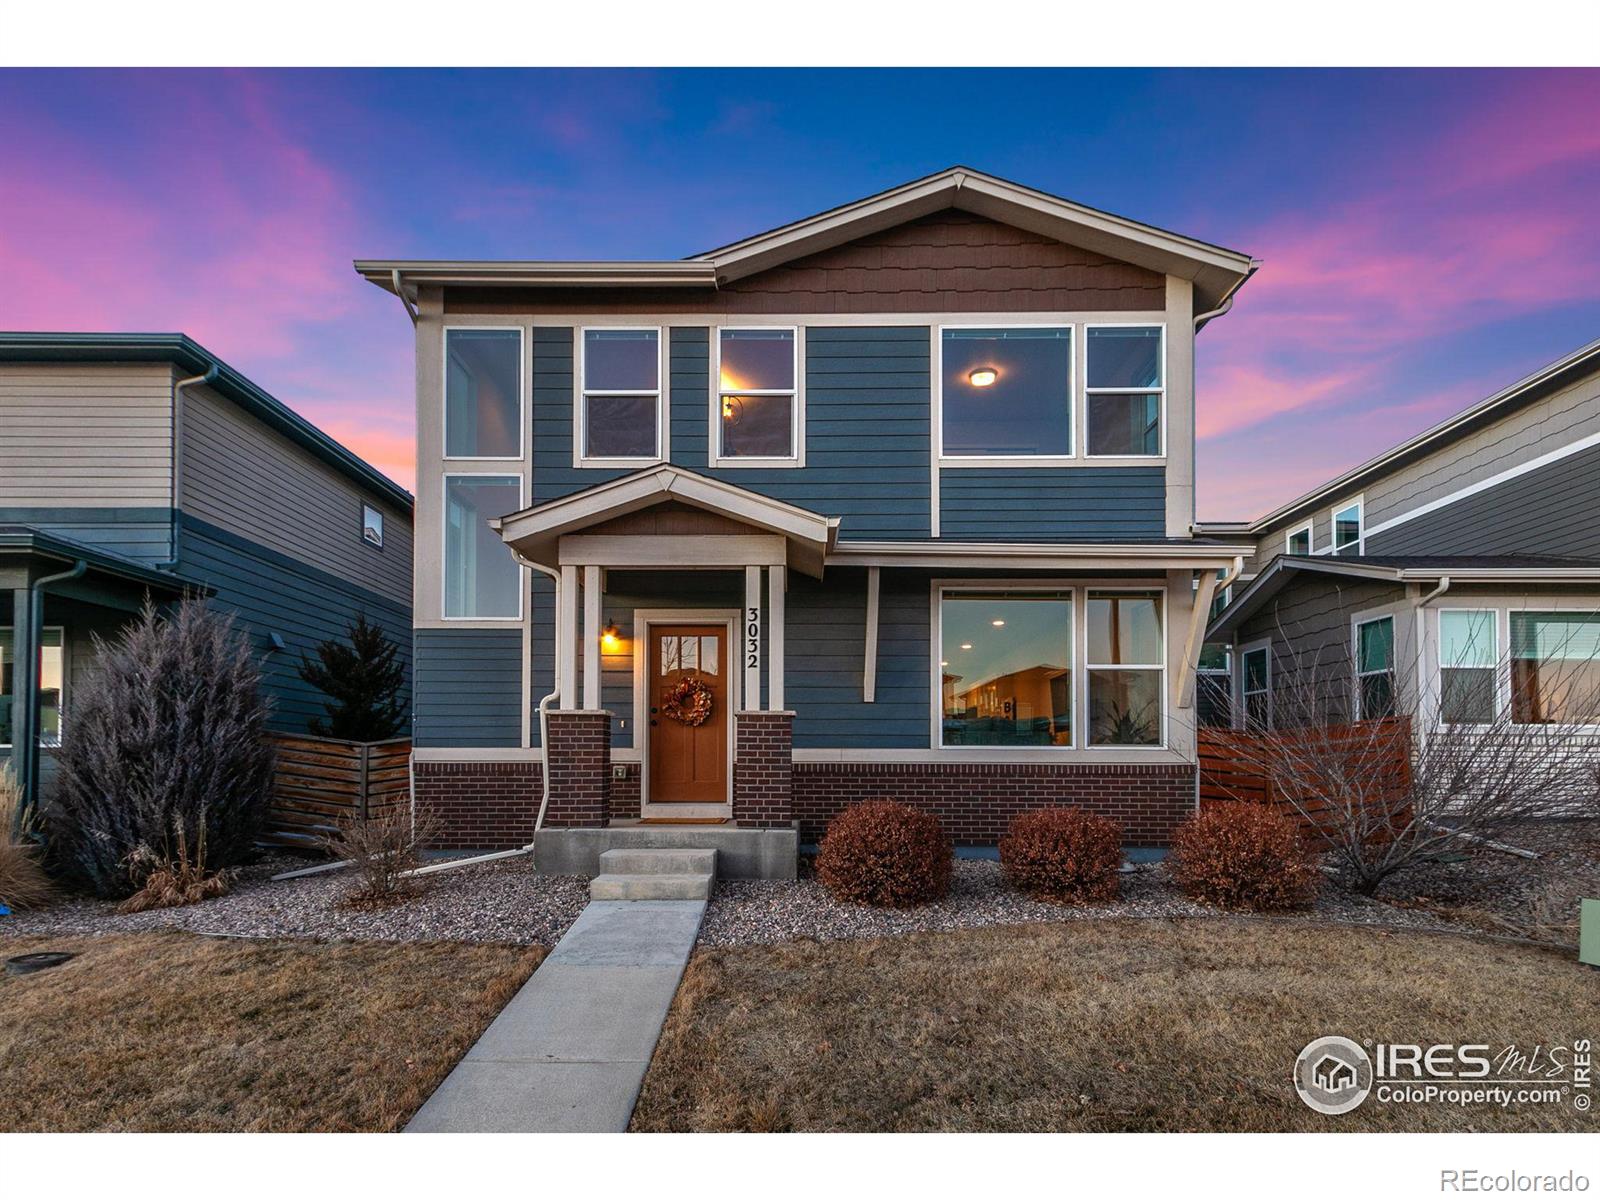 Report Image for 3032  Sykes Drive,Fort Collins, Colorado